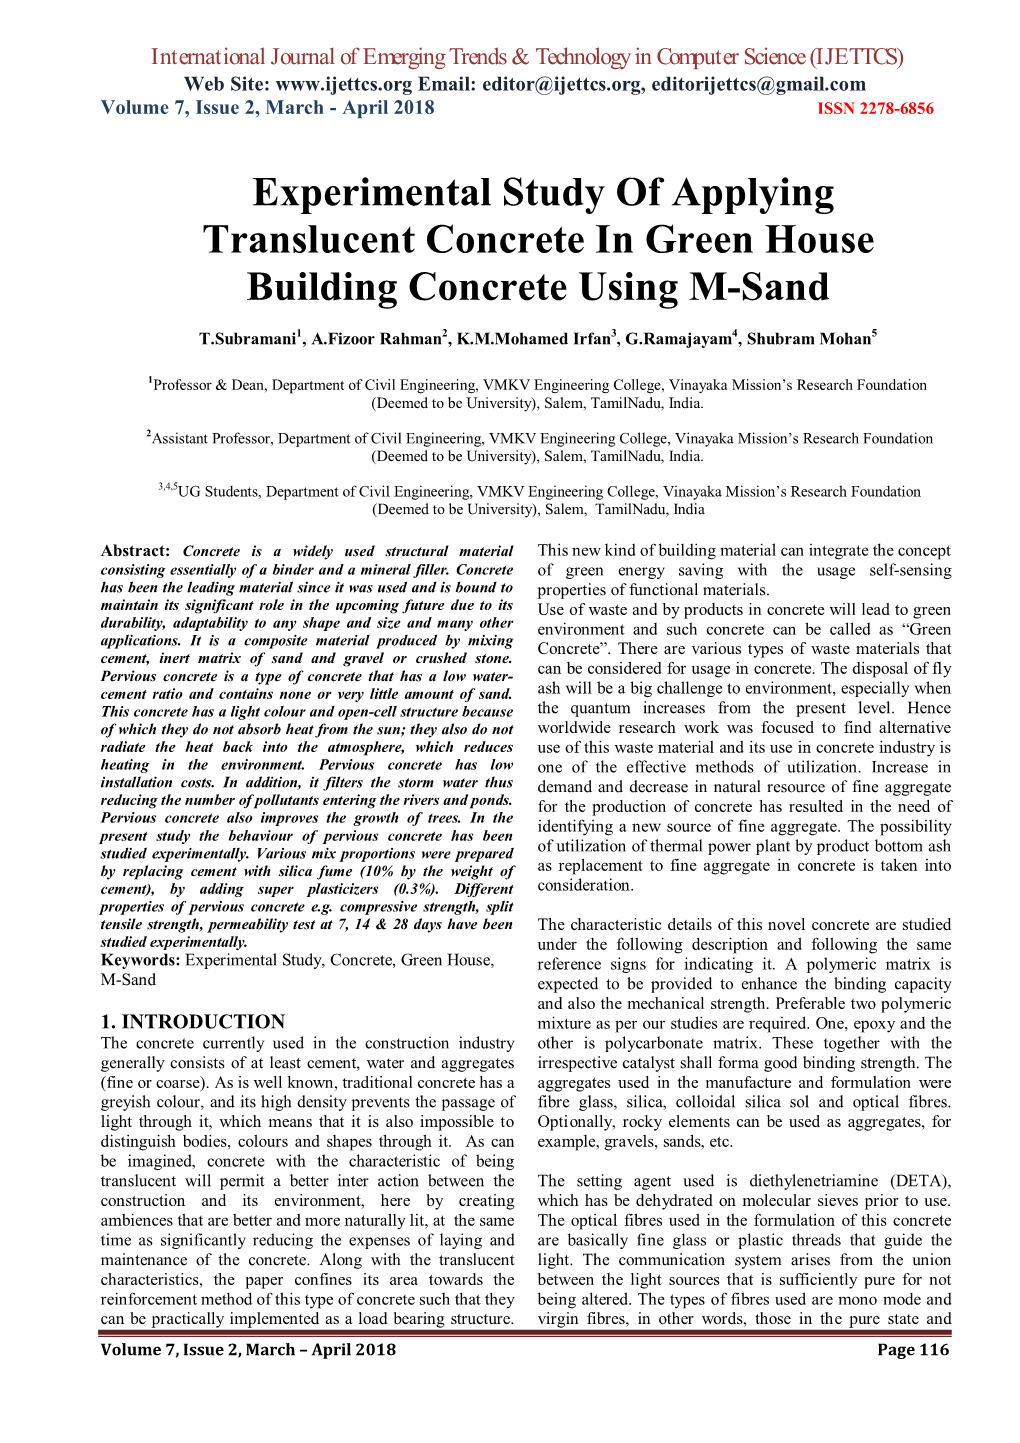 Experimental Study of Applying Translucent Concrete in Green House Building Concrete Using M-Sand